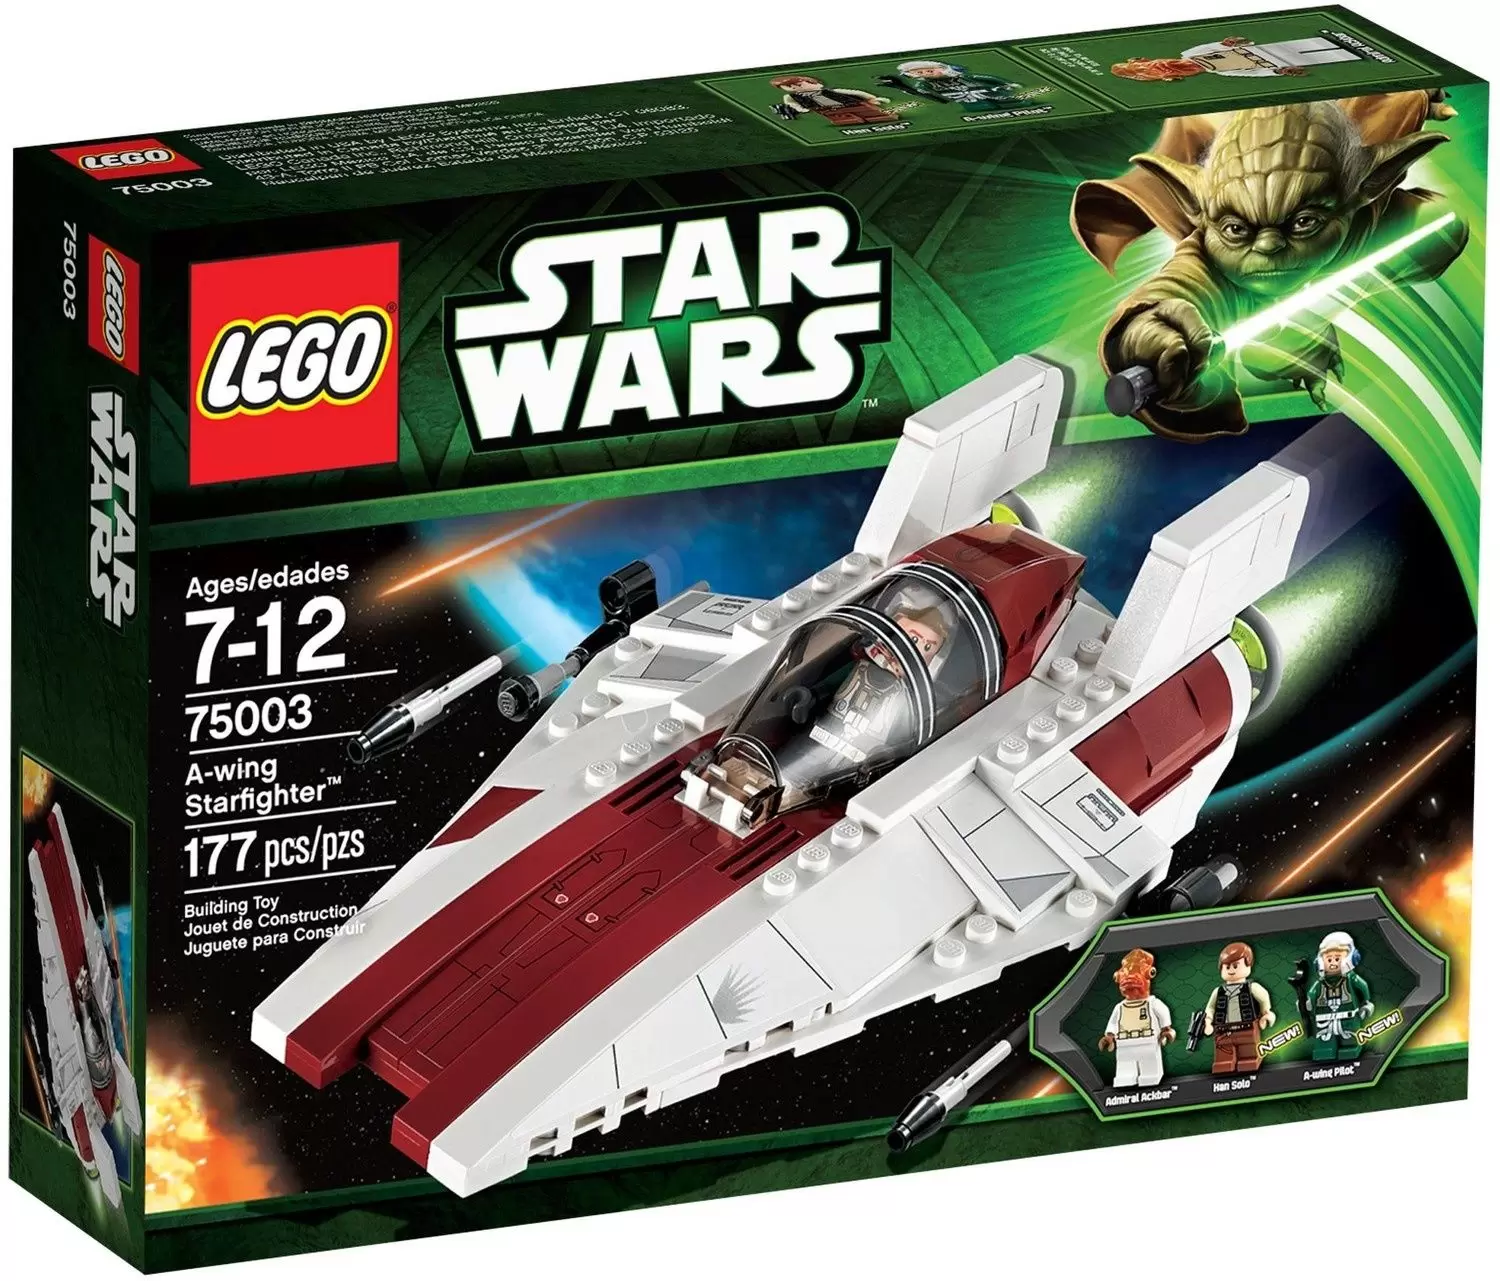 LEGO Star Wars - A-wing Starfighter